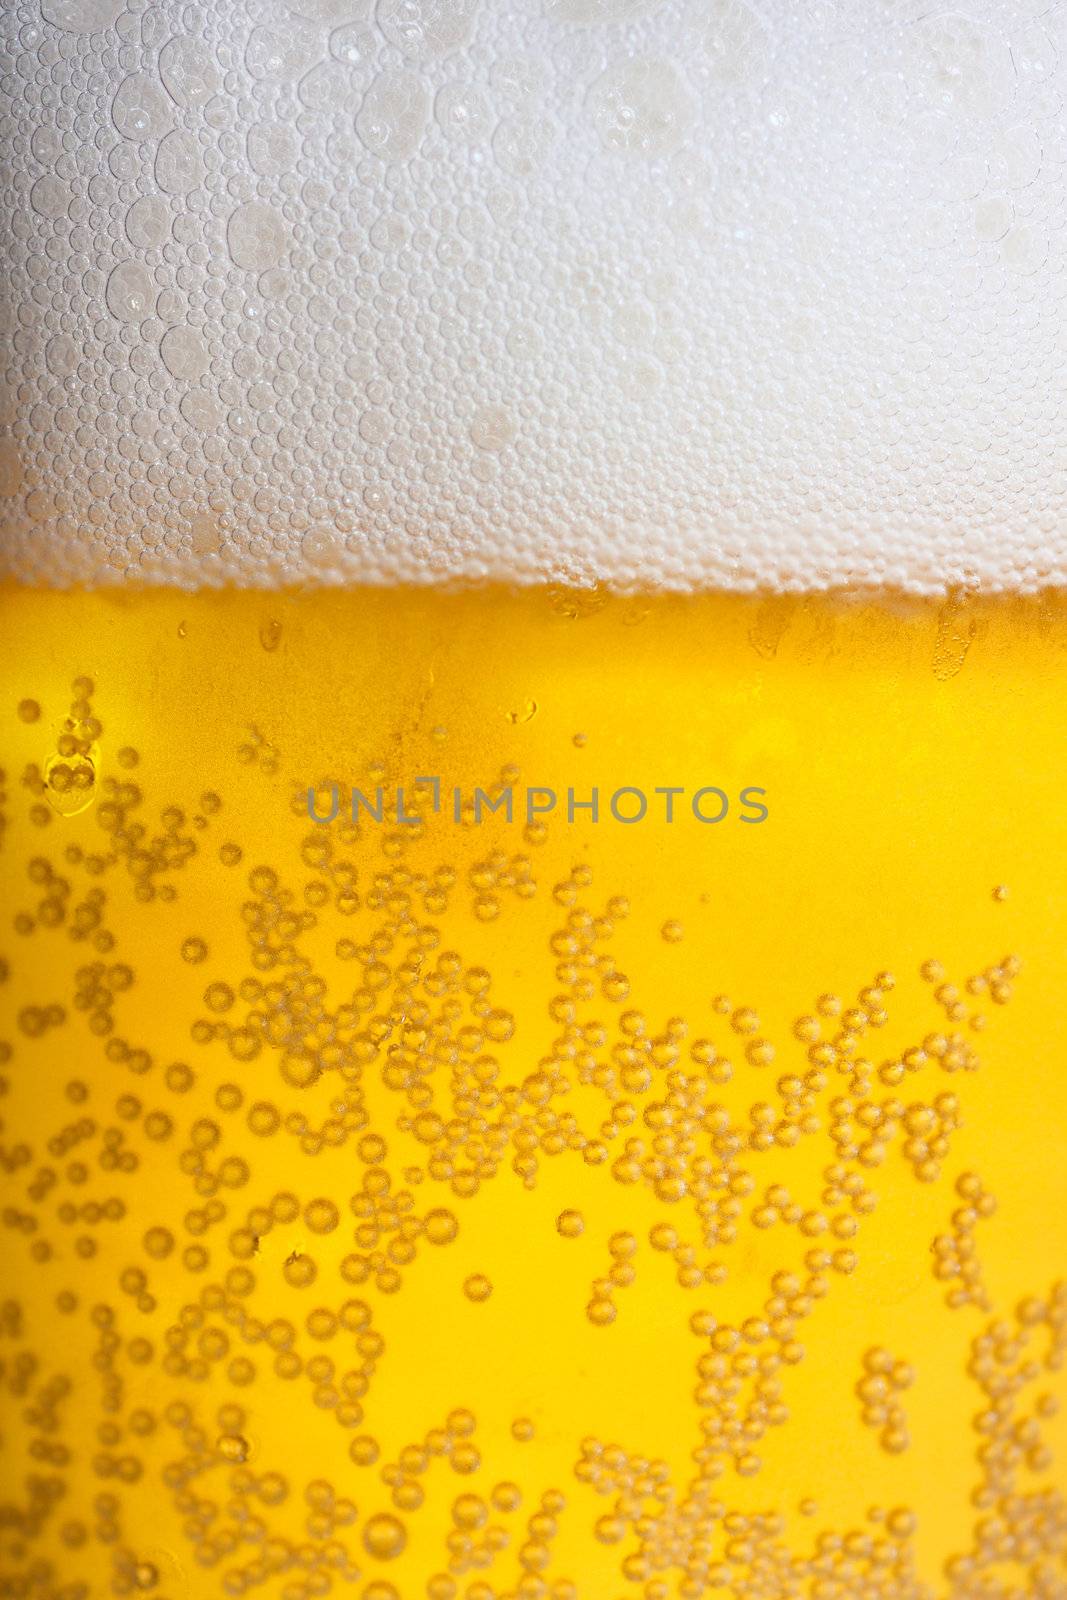 Orange beer and white froth background. Closeup view.